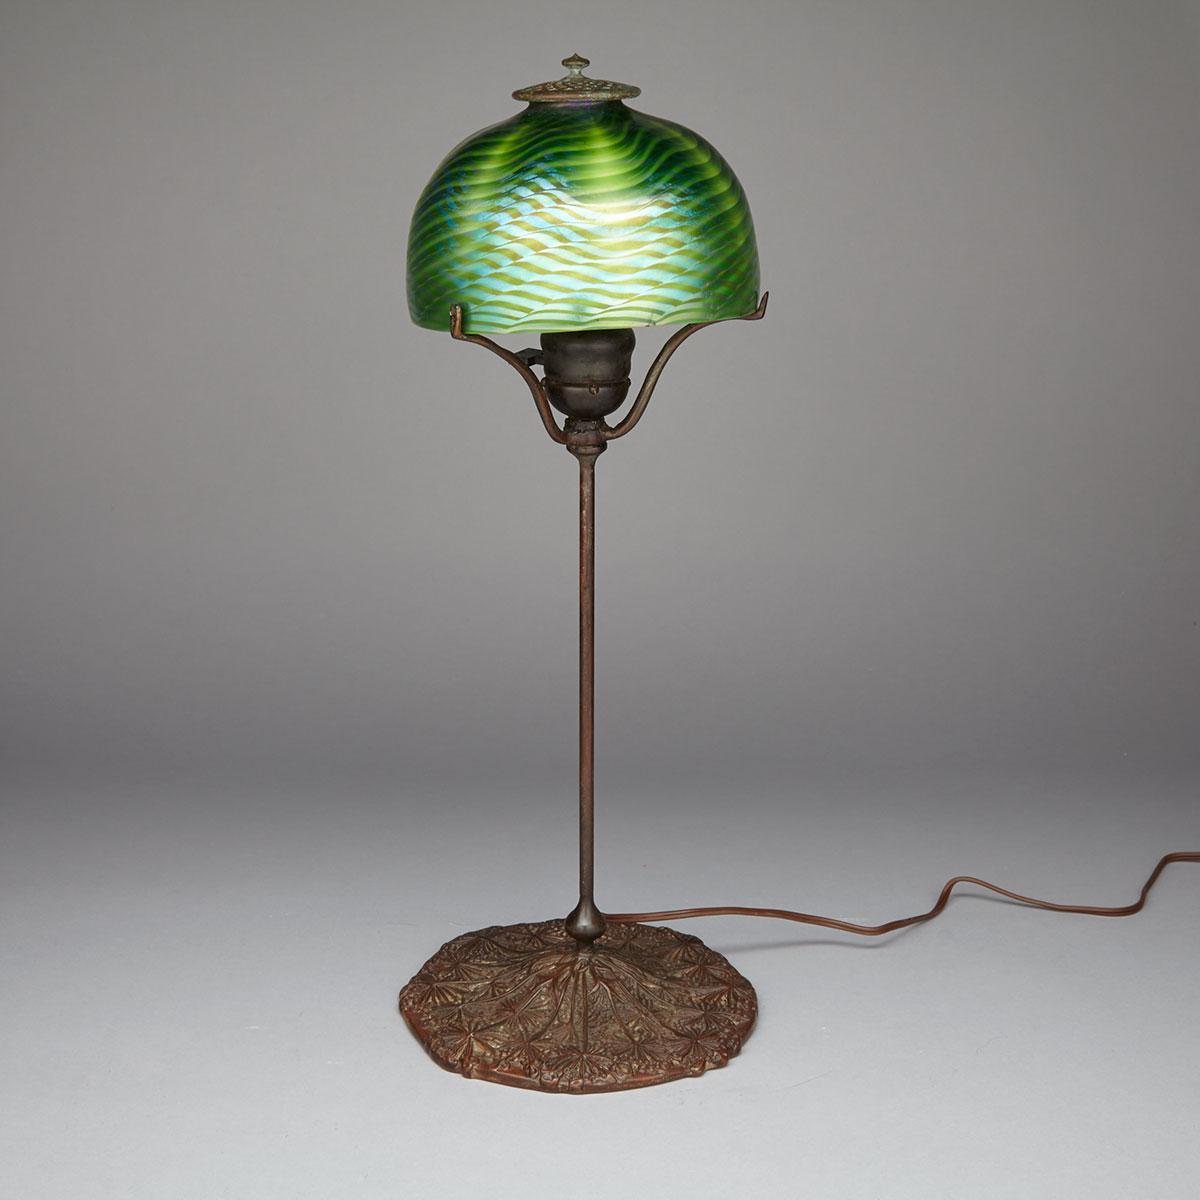 Tiffany Favrile Glass Lamp Shade on Bronze Tiffany Style ‘Wild Carrot’ Base, early 20th century